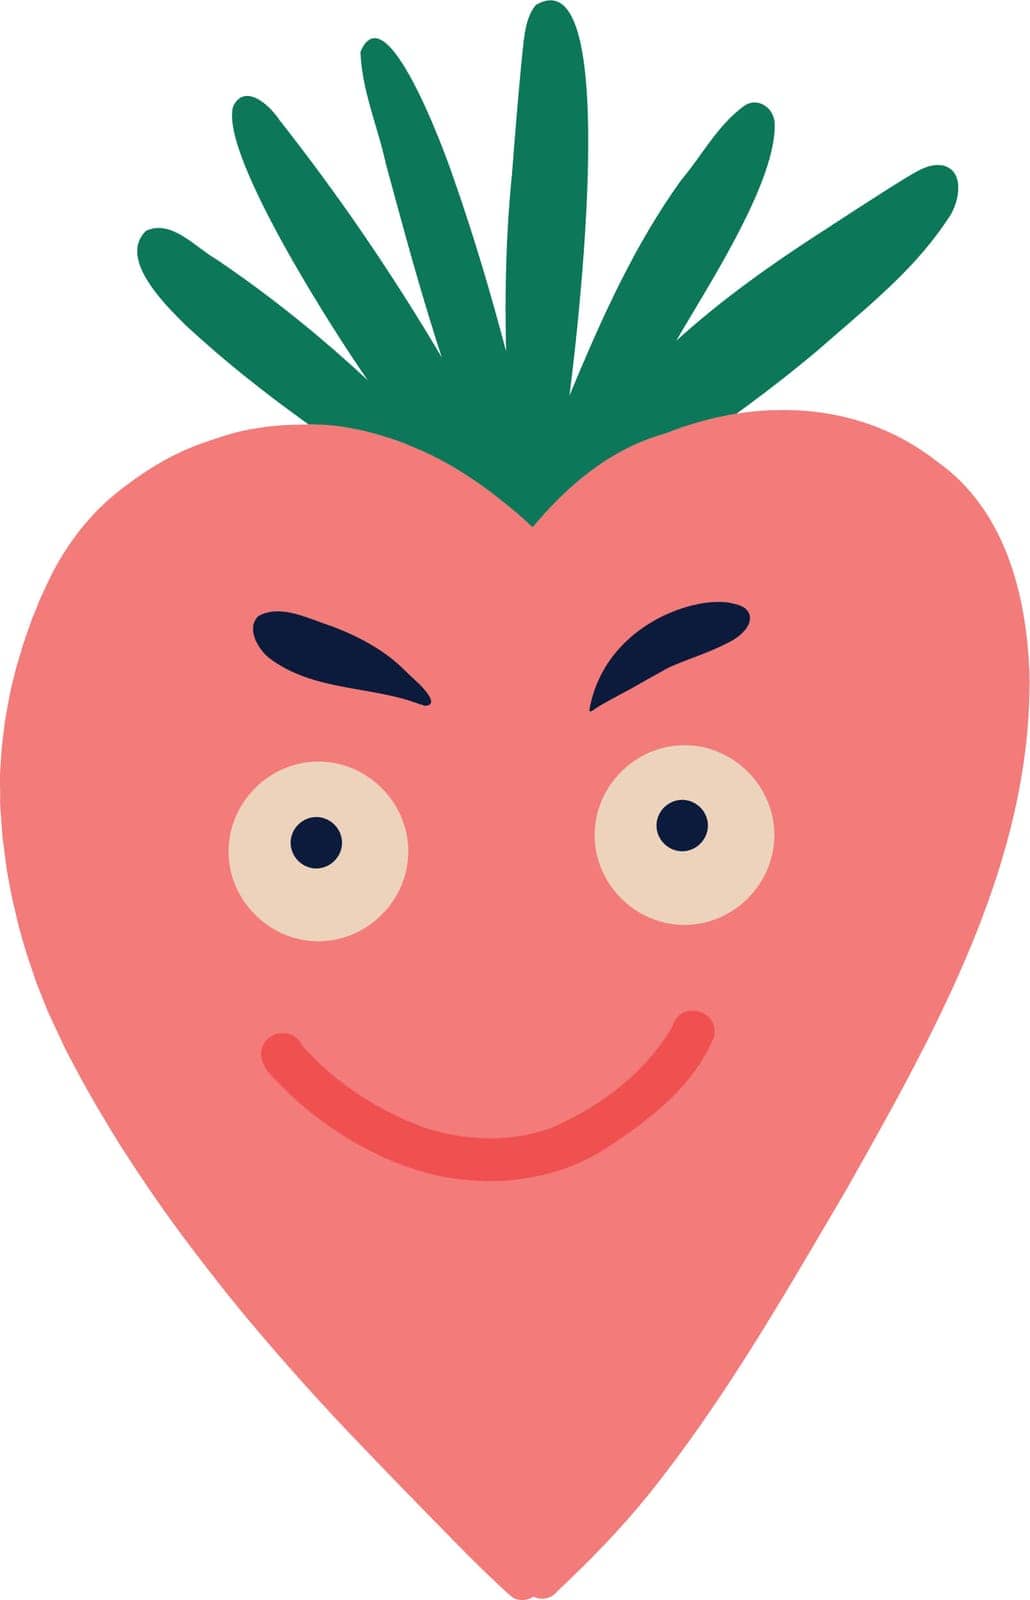 Funny quirky charming strawberry with a funny face and big eyes . Illustration in a modern hand-drawn childish style